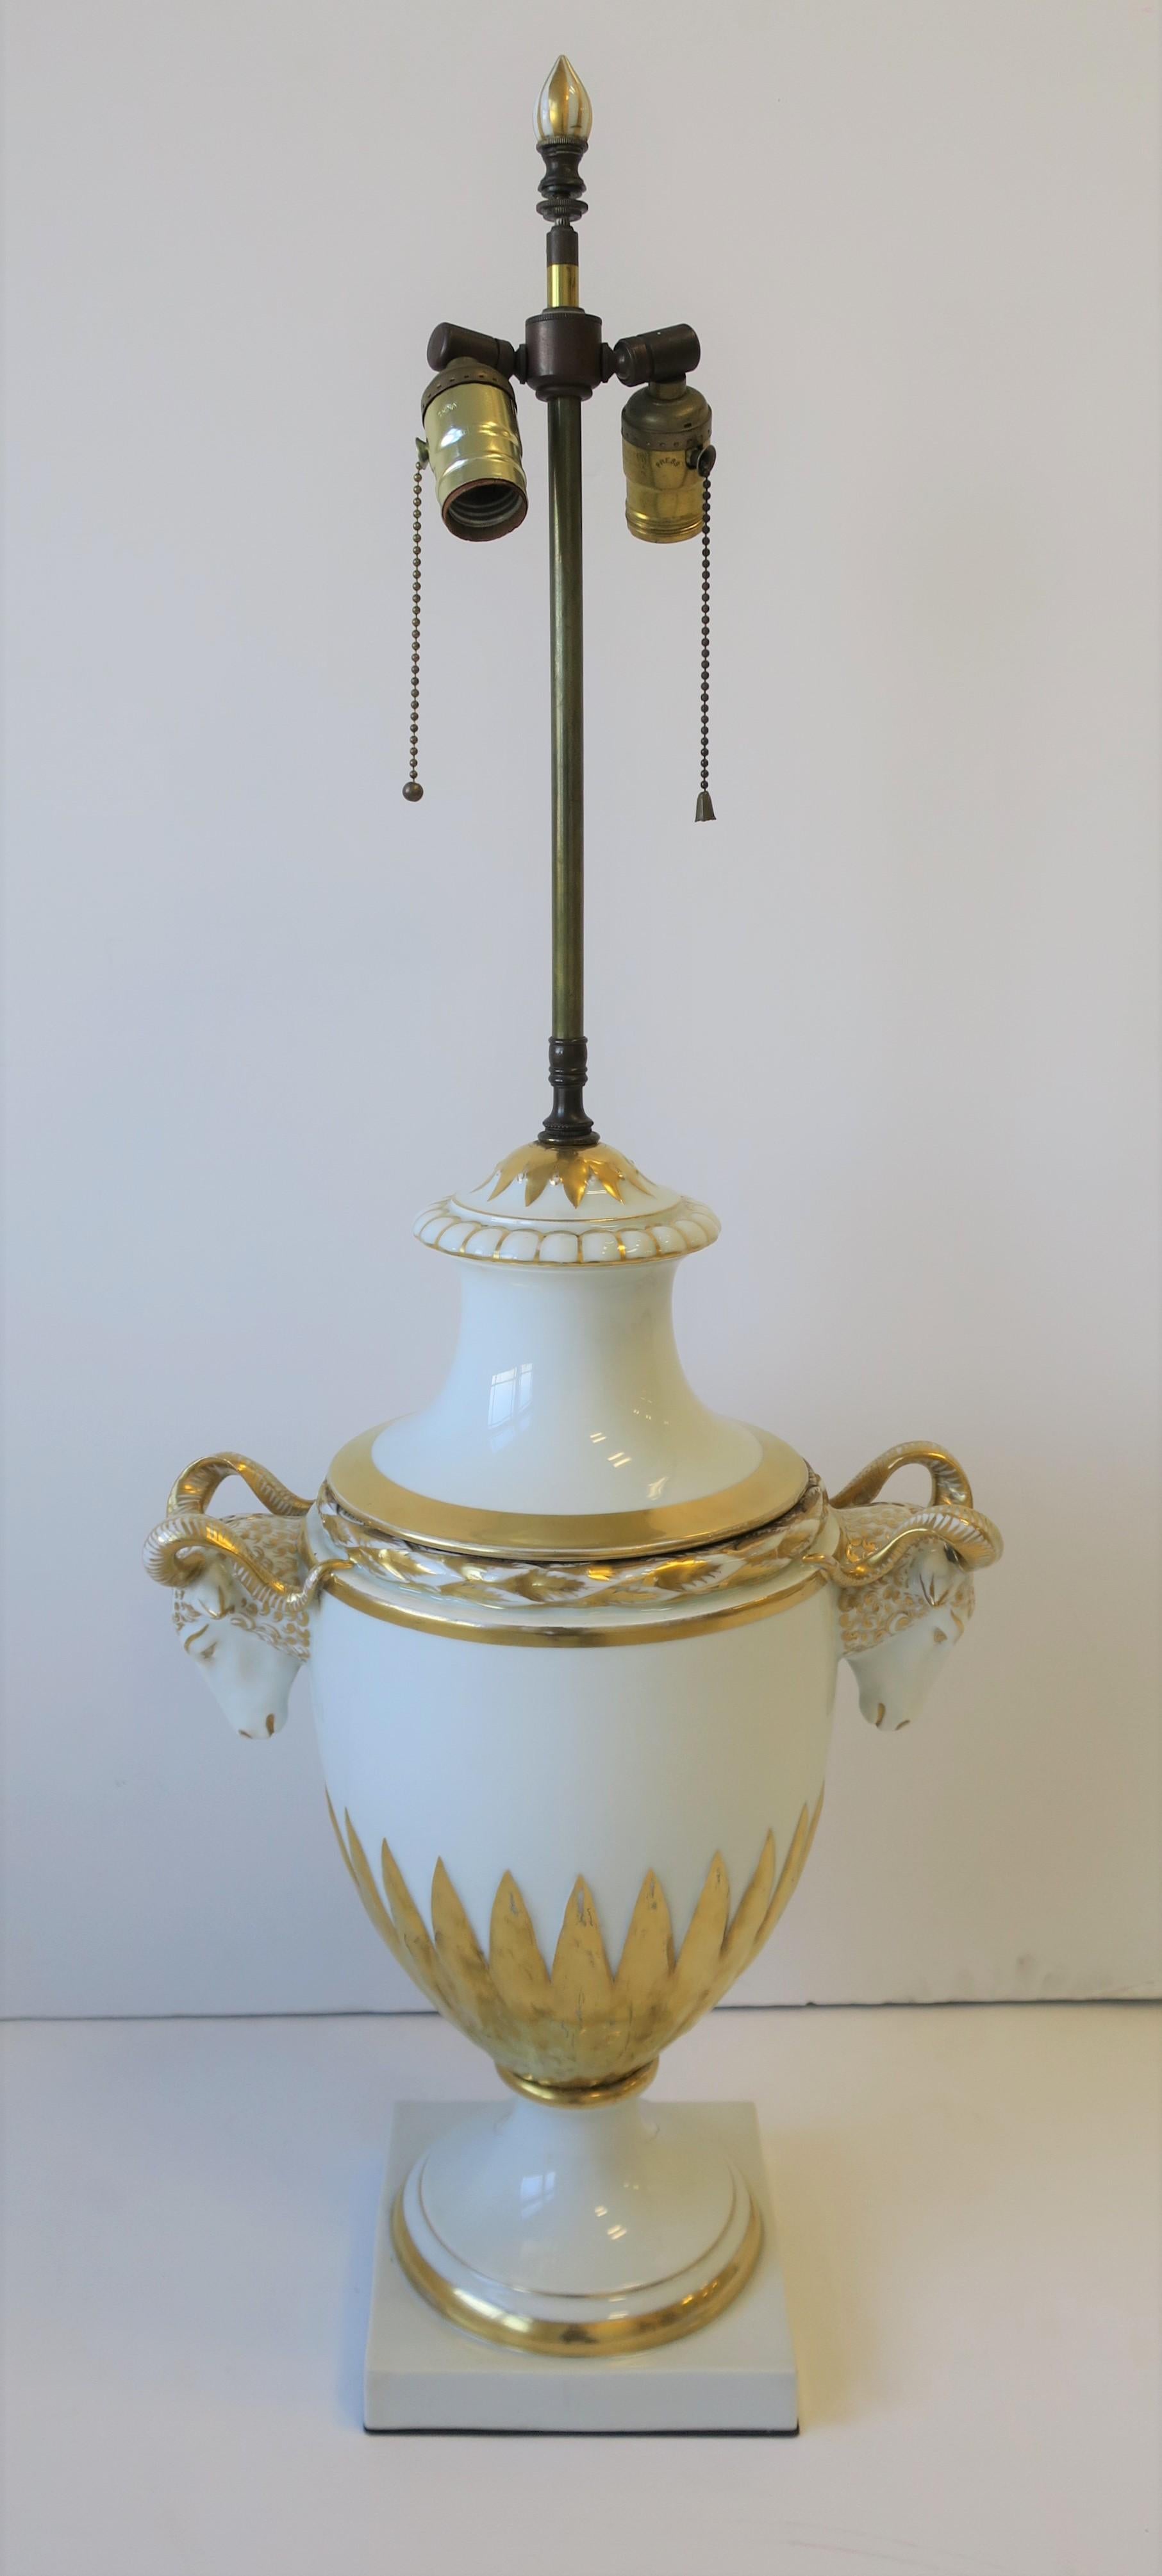 Urn and Rams Head White & Gold Porcelain Table Lamp Empire Style, German, Large For Sale 8